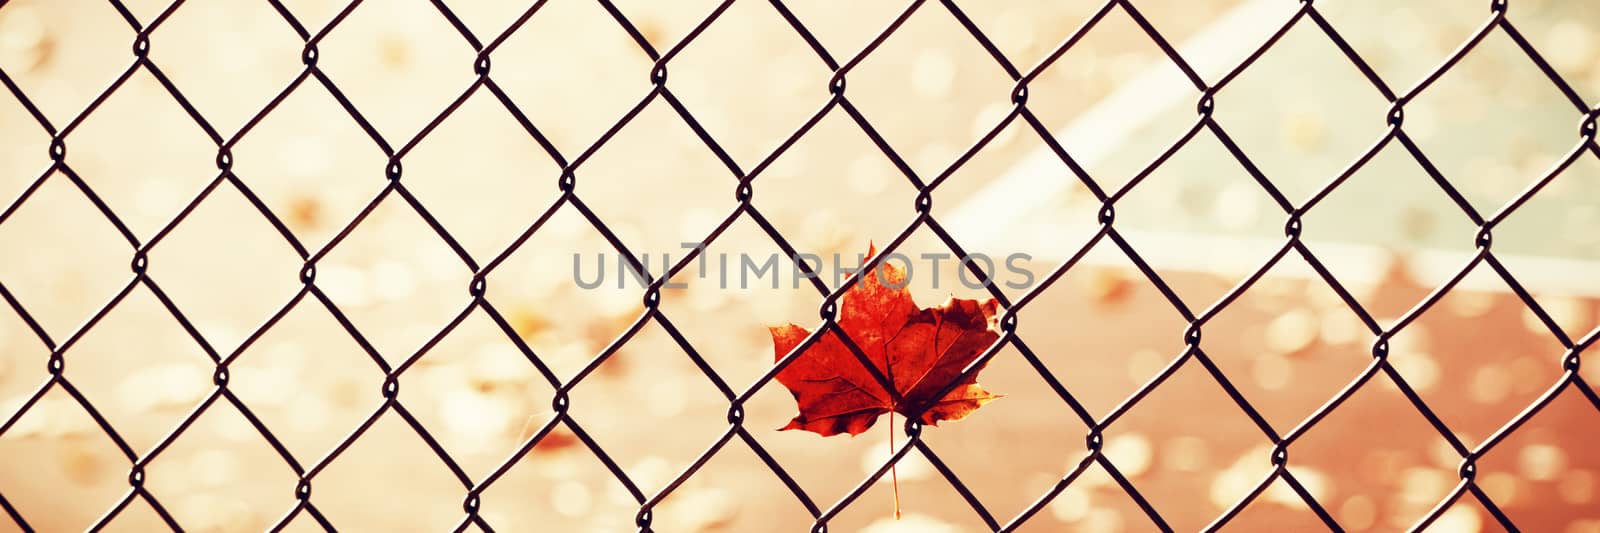 maple leaf in front of a tennis court by Wavebreakmedia